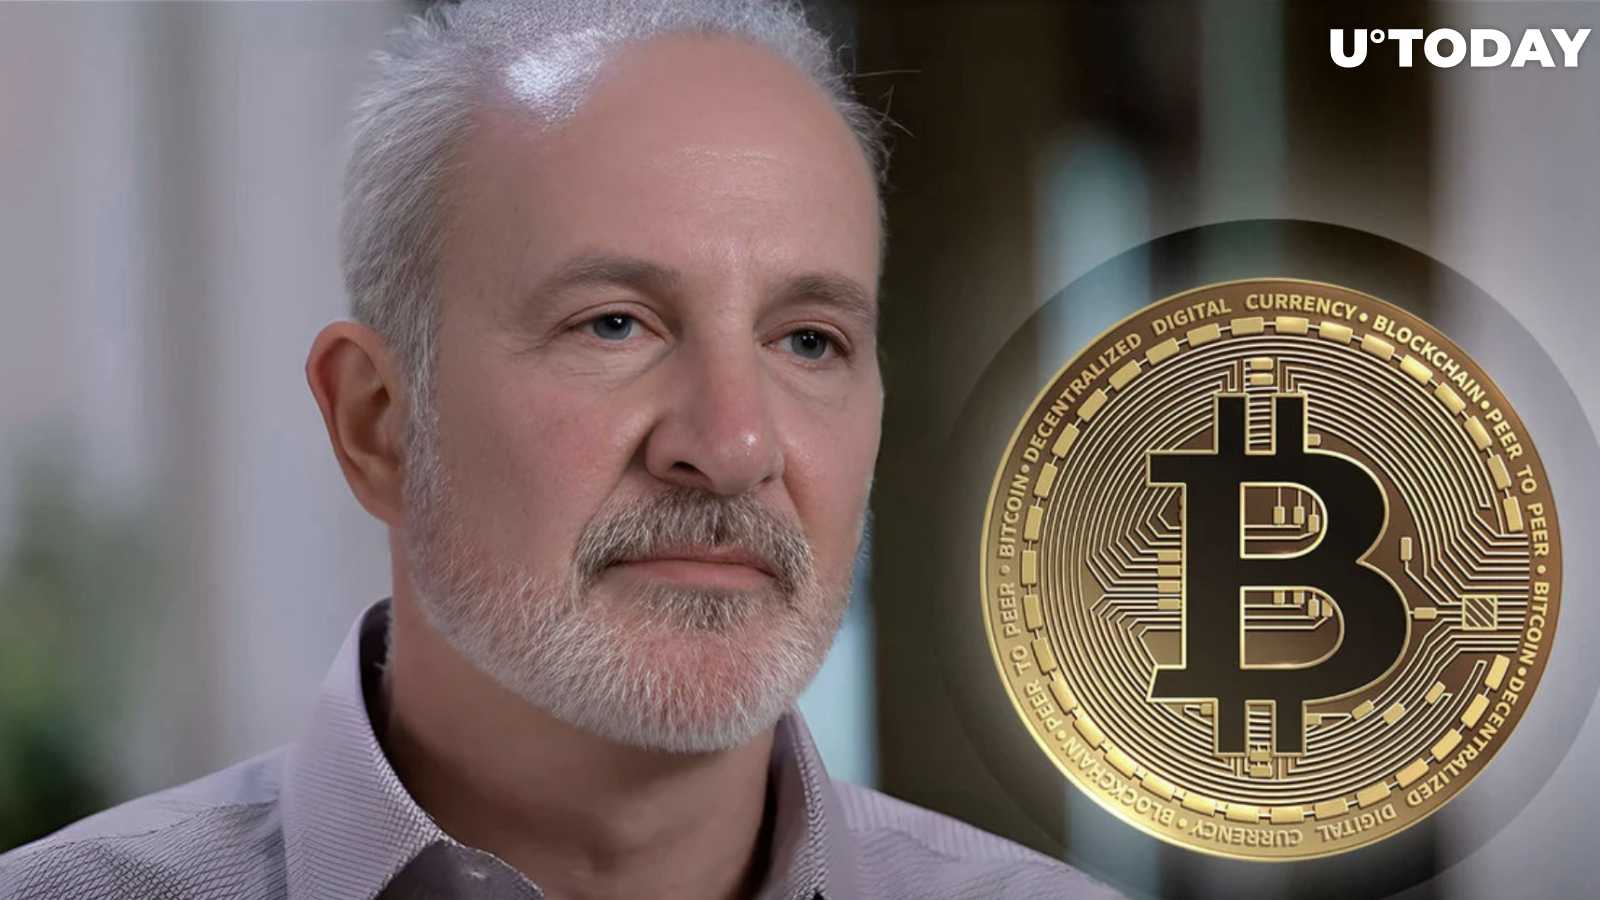 Peter Schiff on Silver: "It's Bitcoin 2.0"